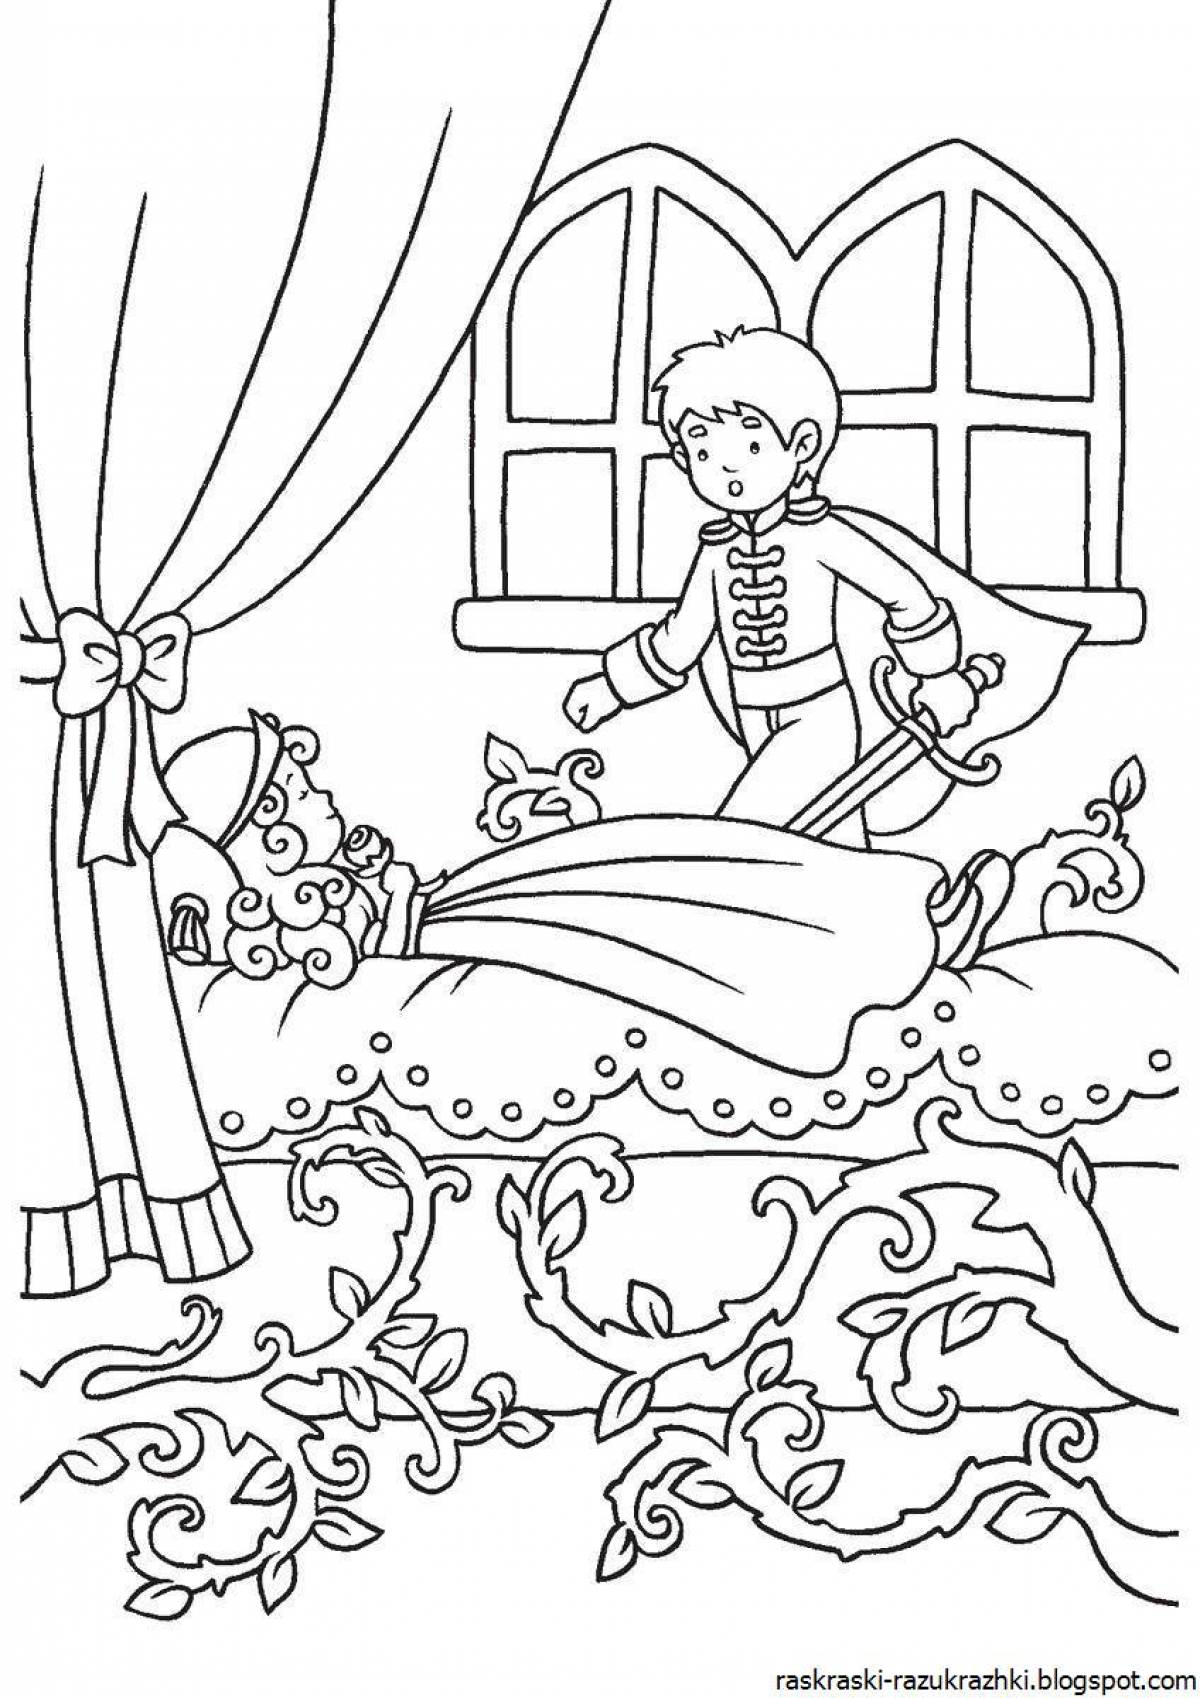 Playful coloring book based on fairy tales